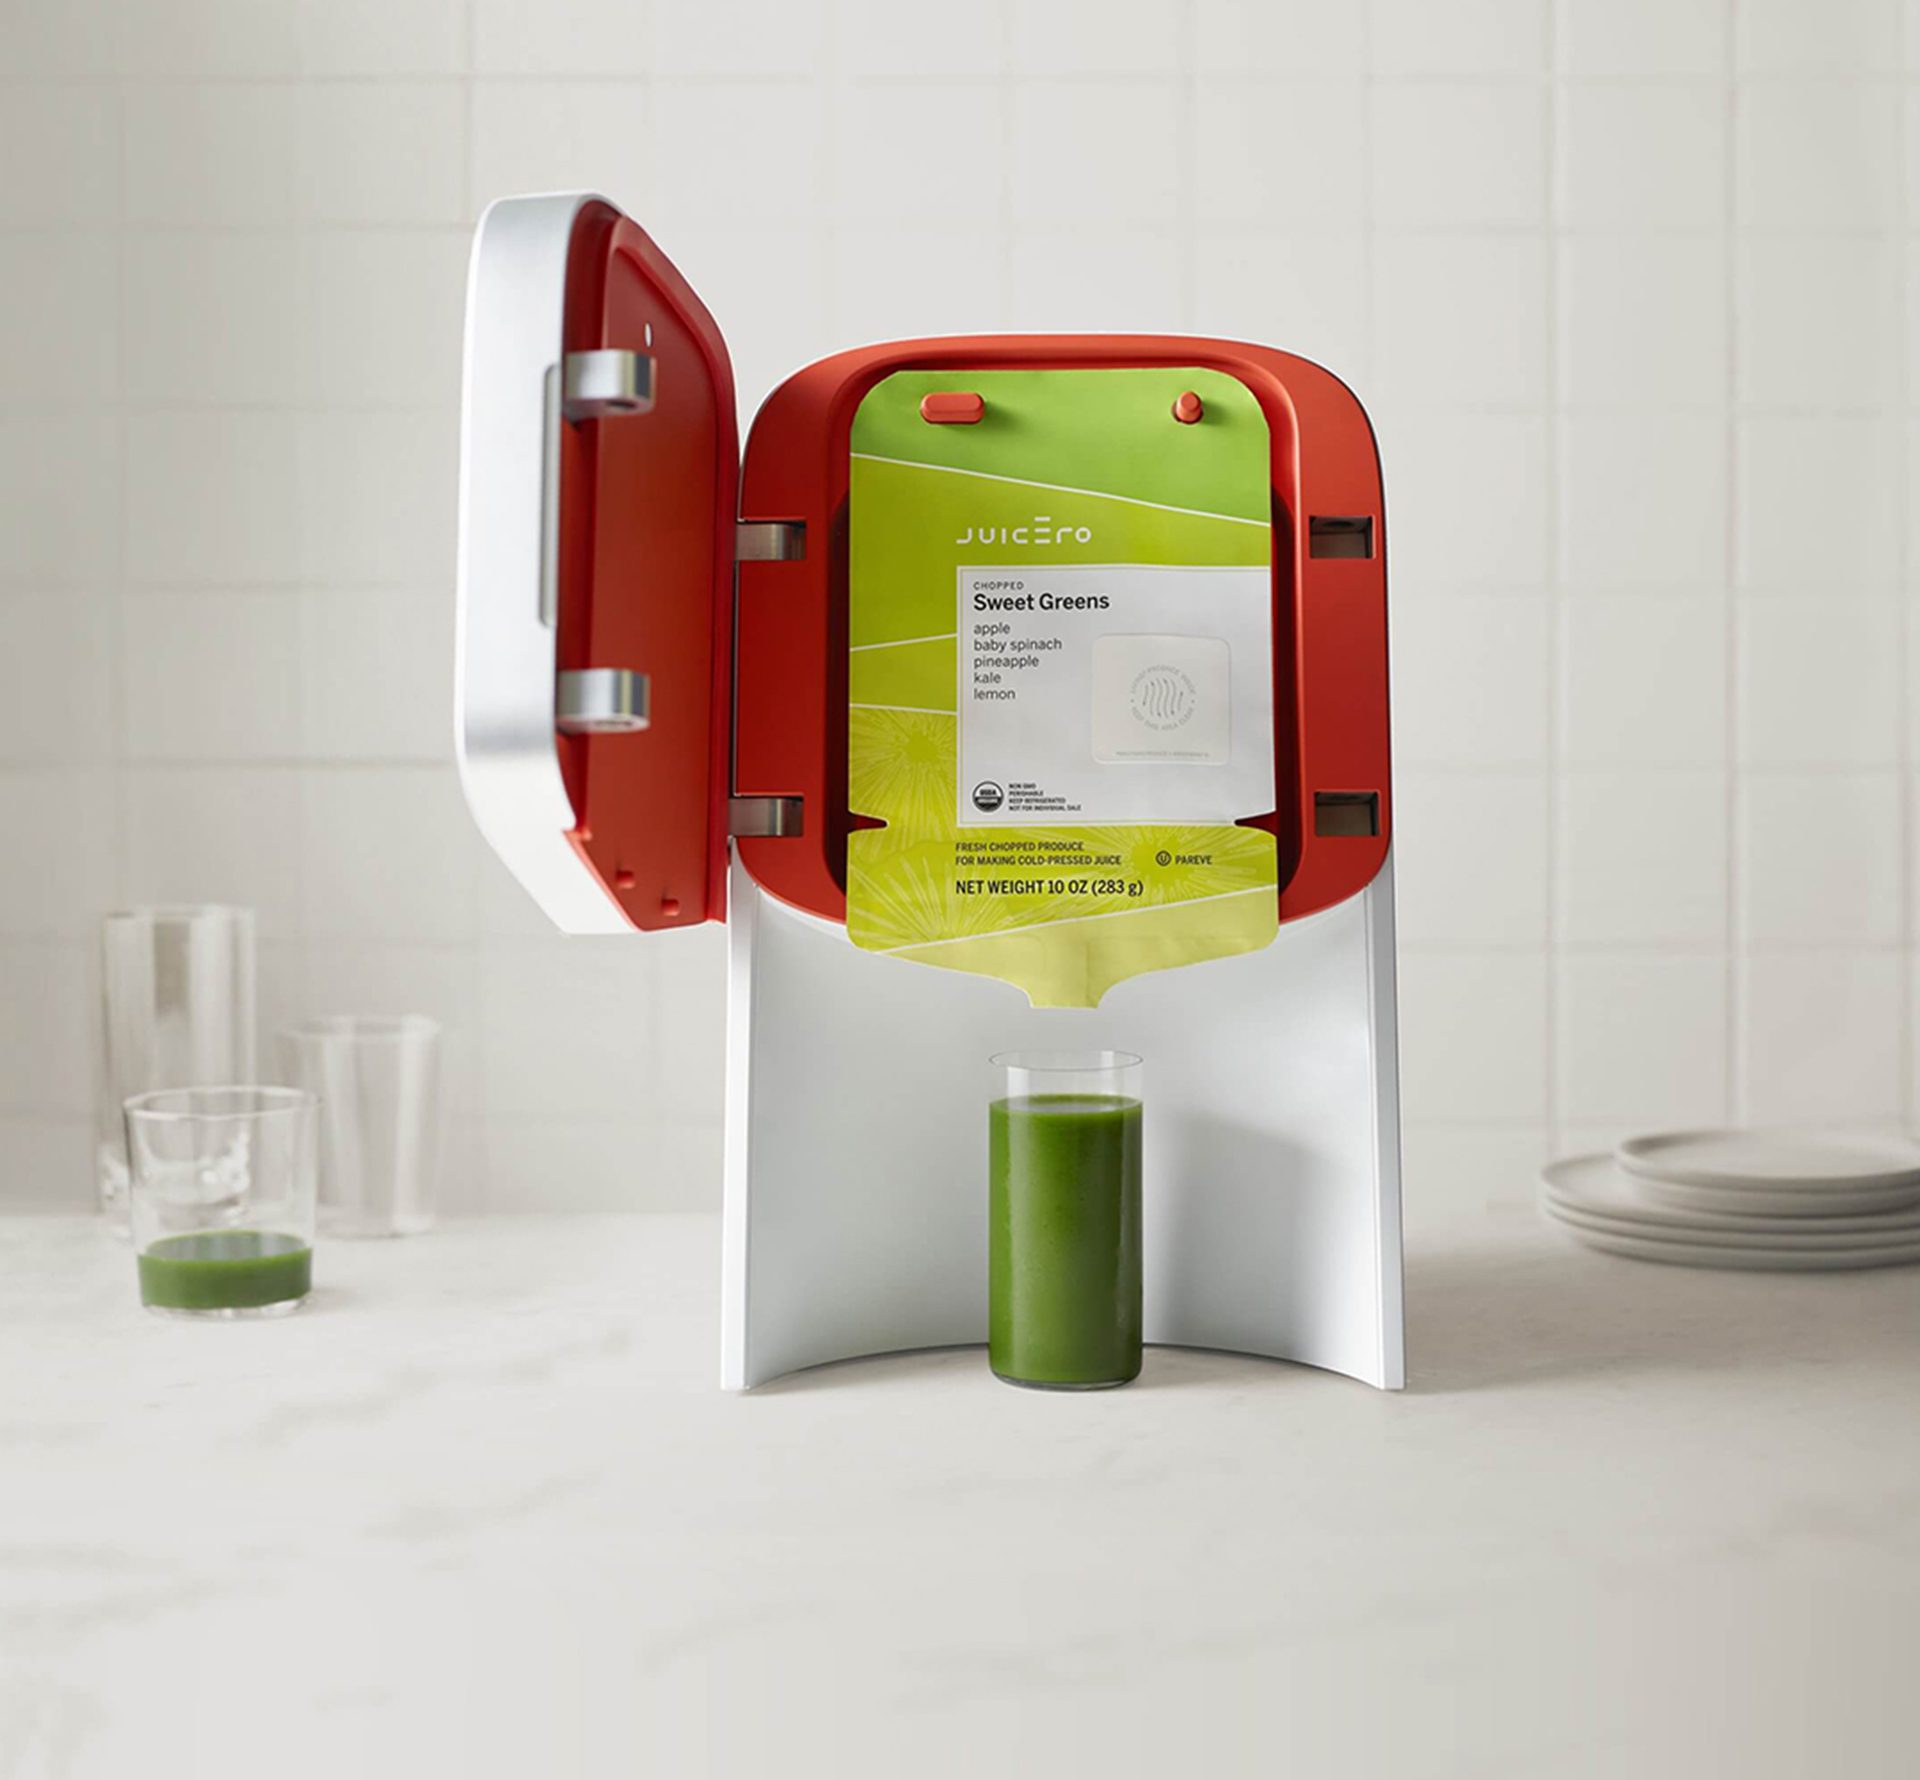 Juicero startup product example featured by Rodd